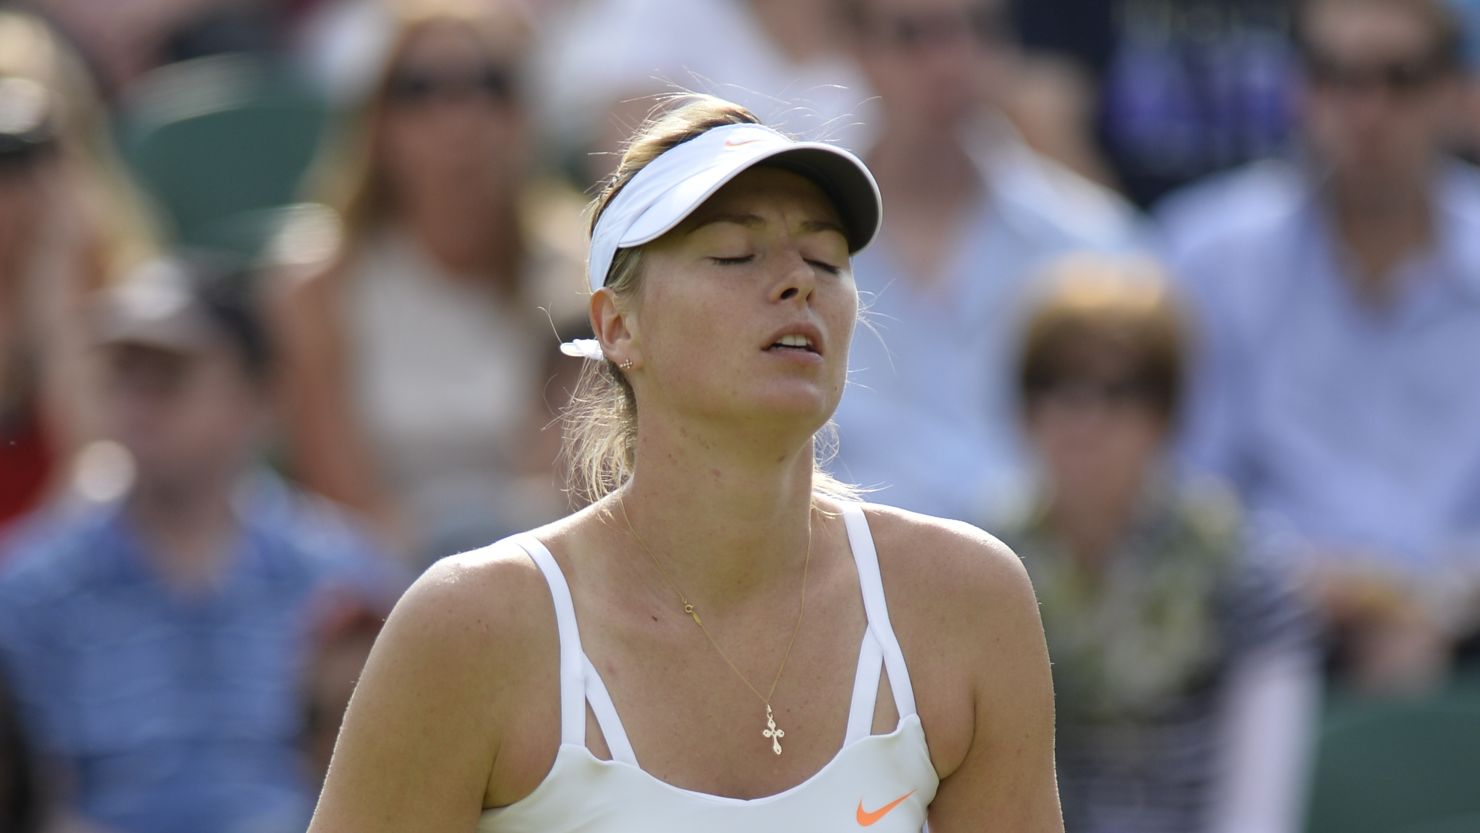 Sharapova suffered a shock second round defeat at Wimbledon before injury ended her season.